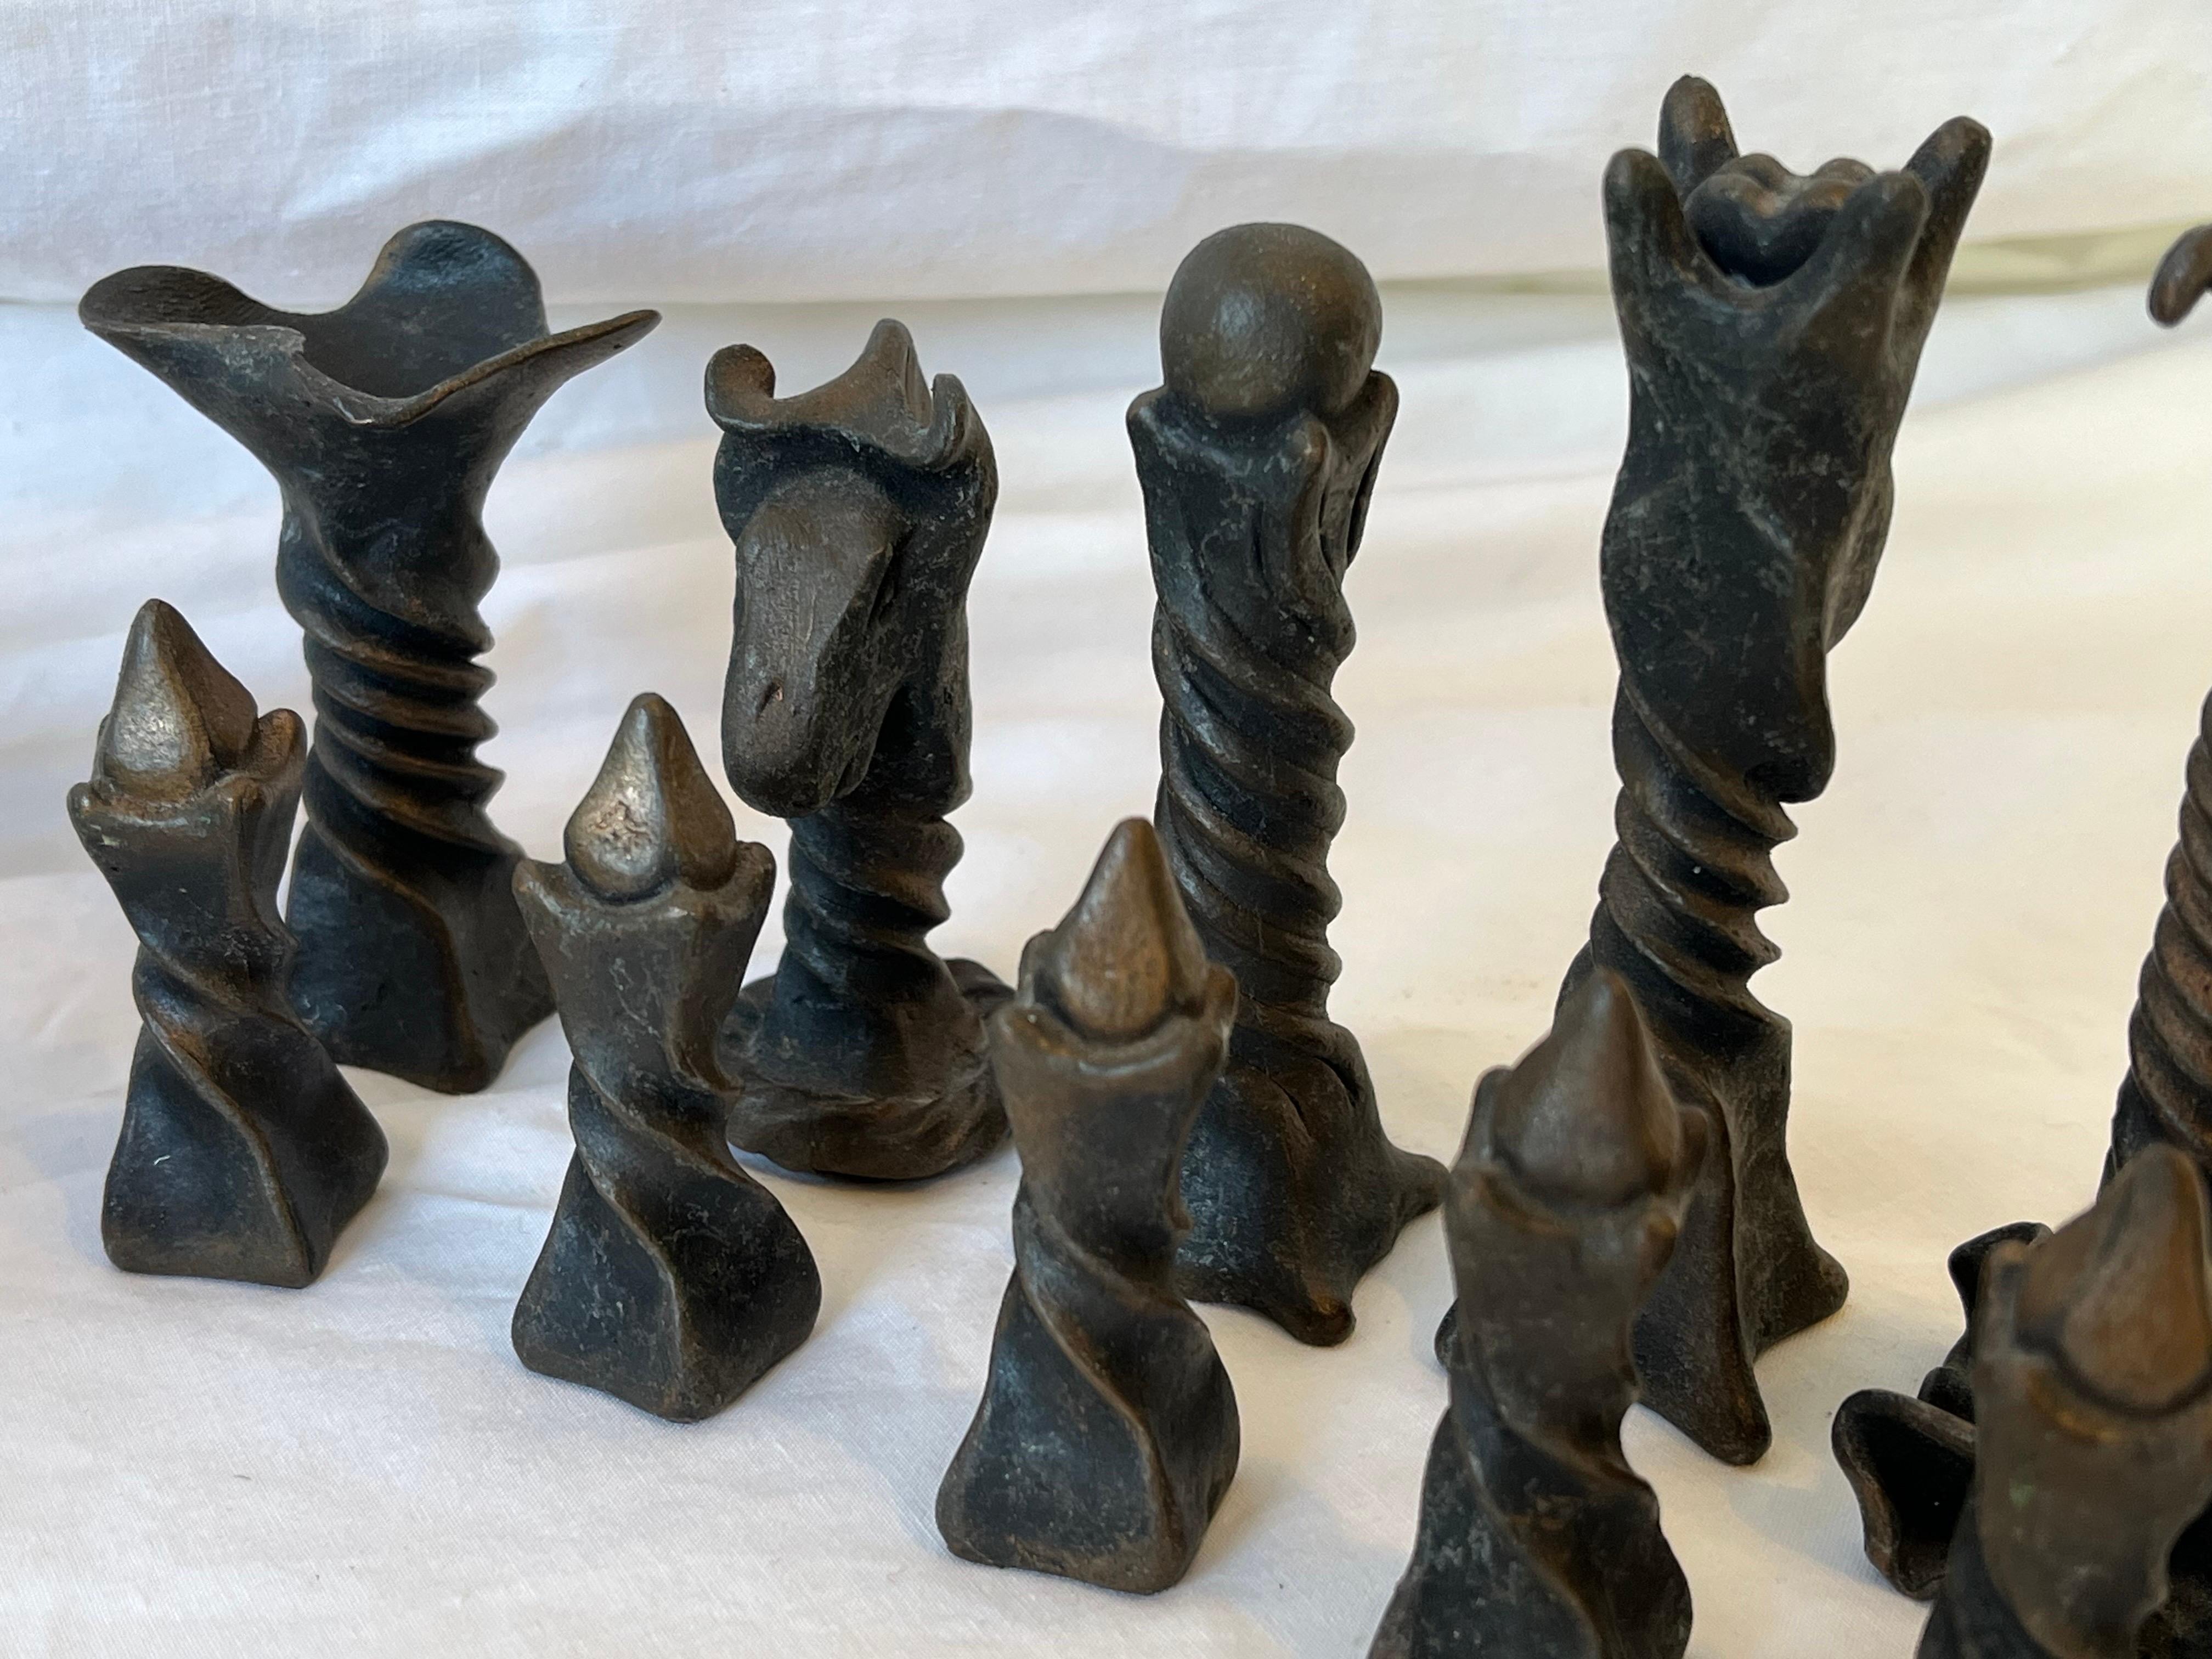 Vintage Brutalist Style Cast Metal Chess Set with Twisted and Flanged Design 4